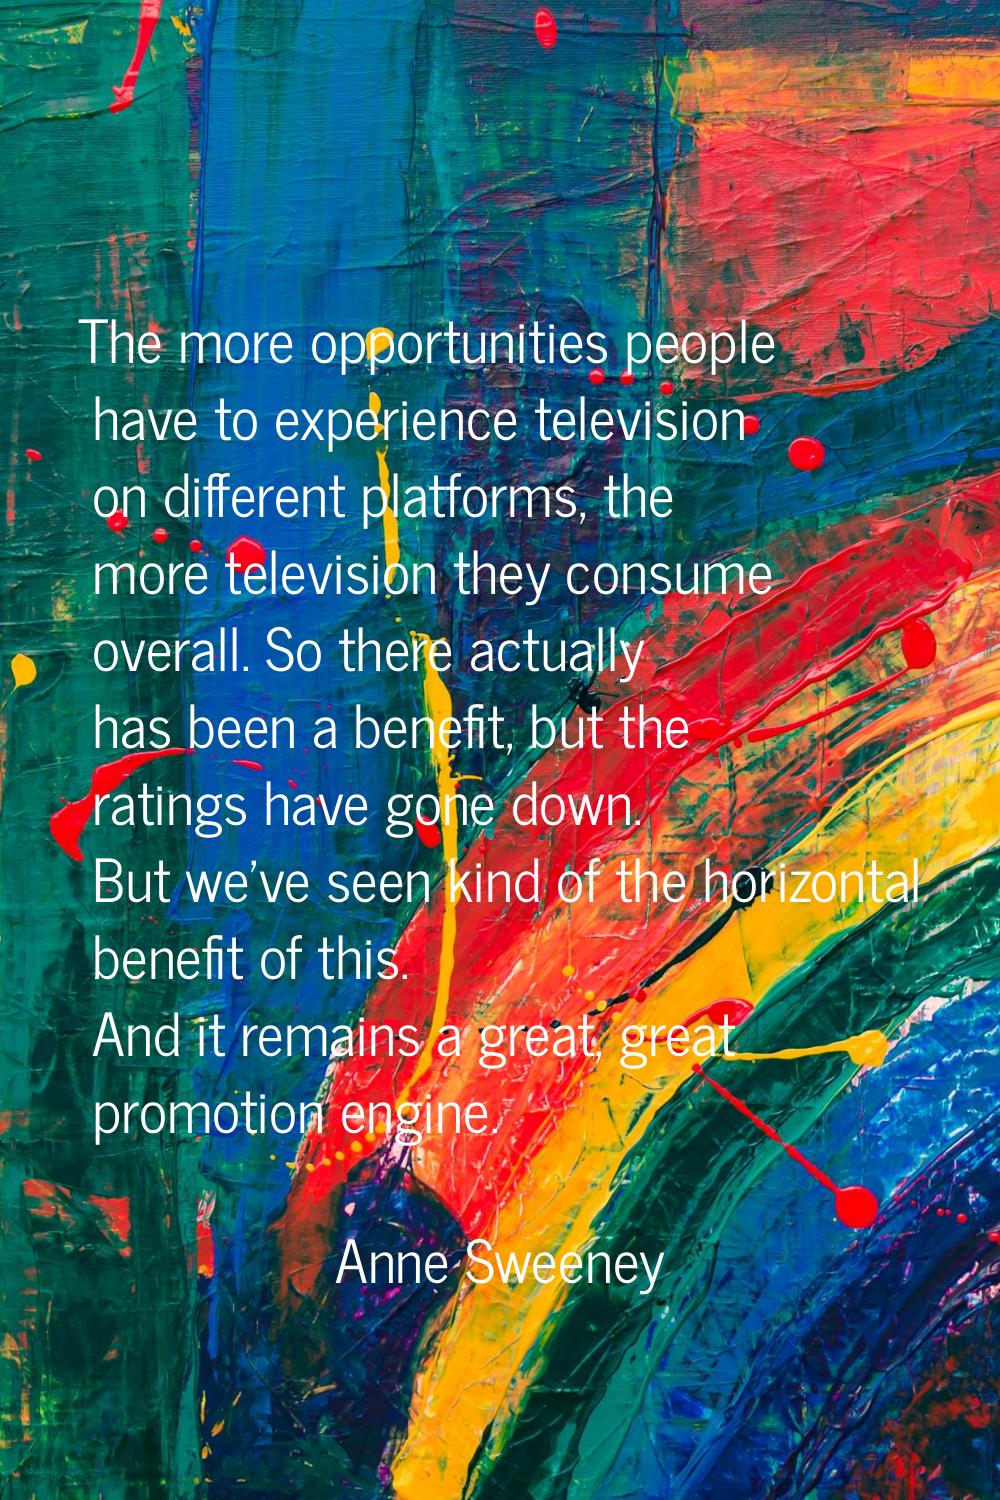 The more opportunities people have to experience television on different platforms, the more televi